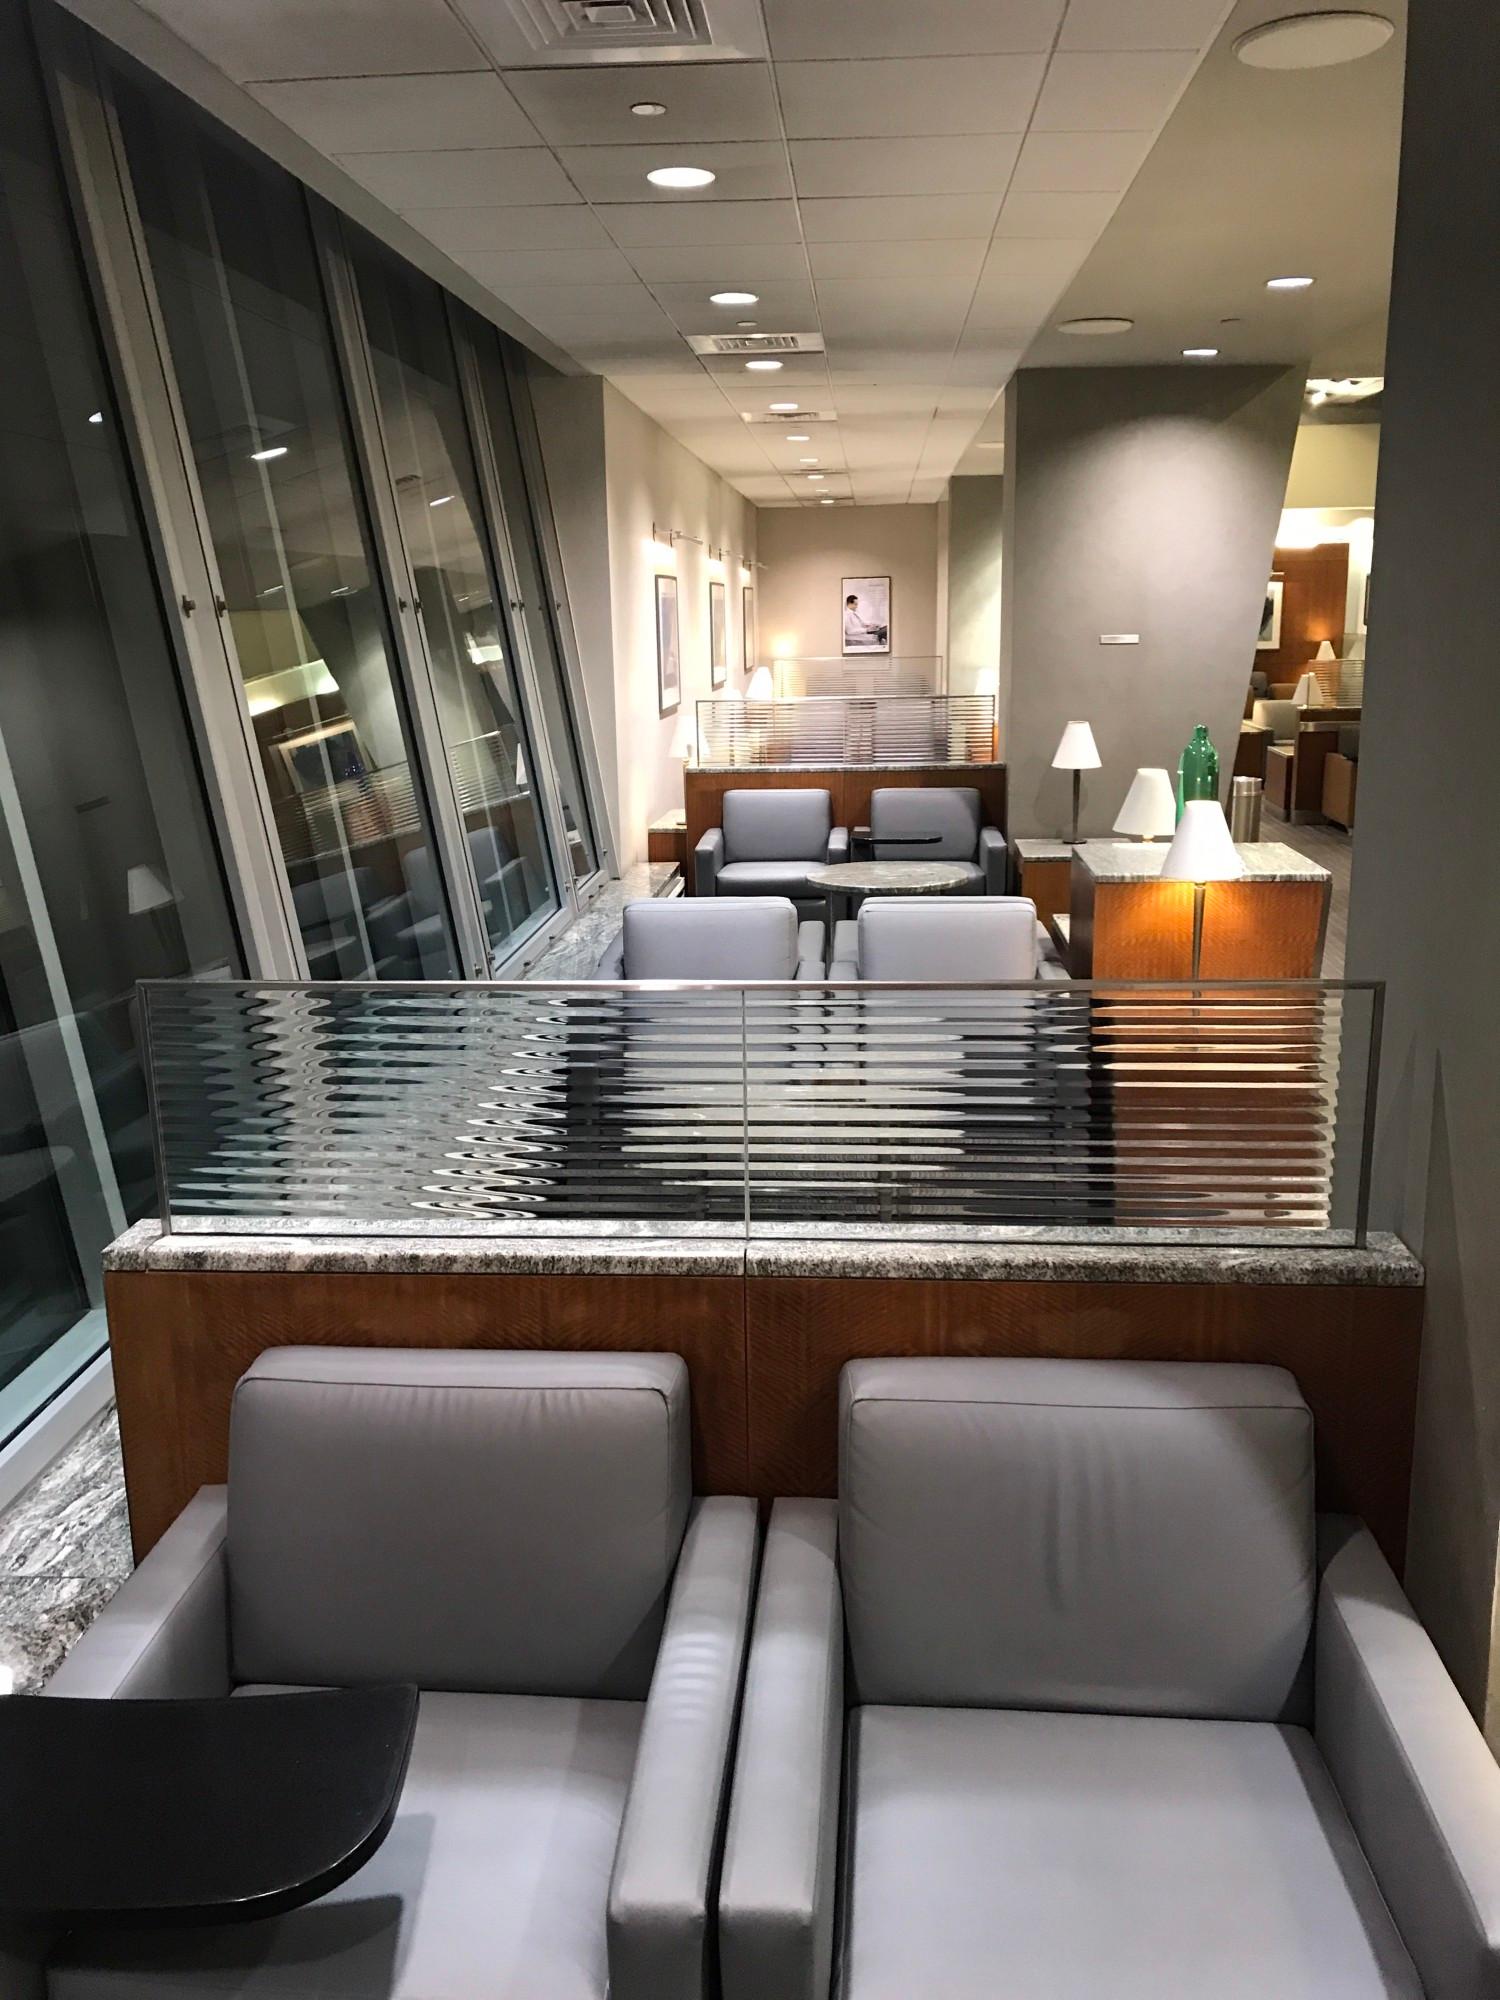 American Airlines Admirals Club image 38 of 48